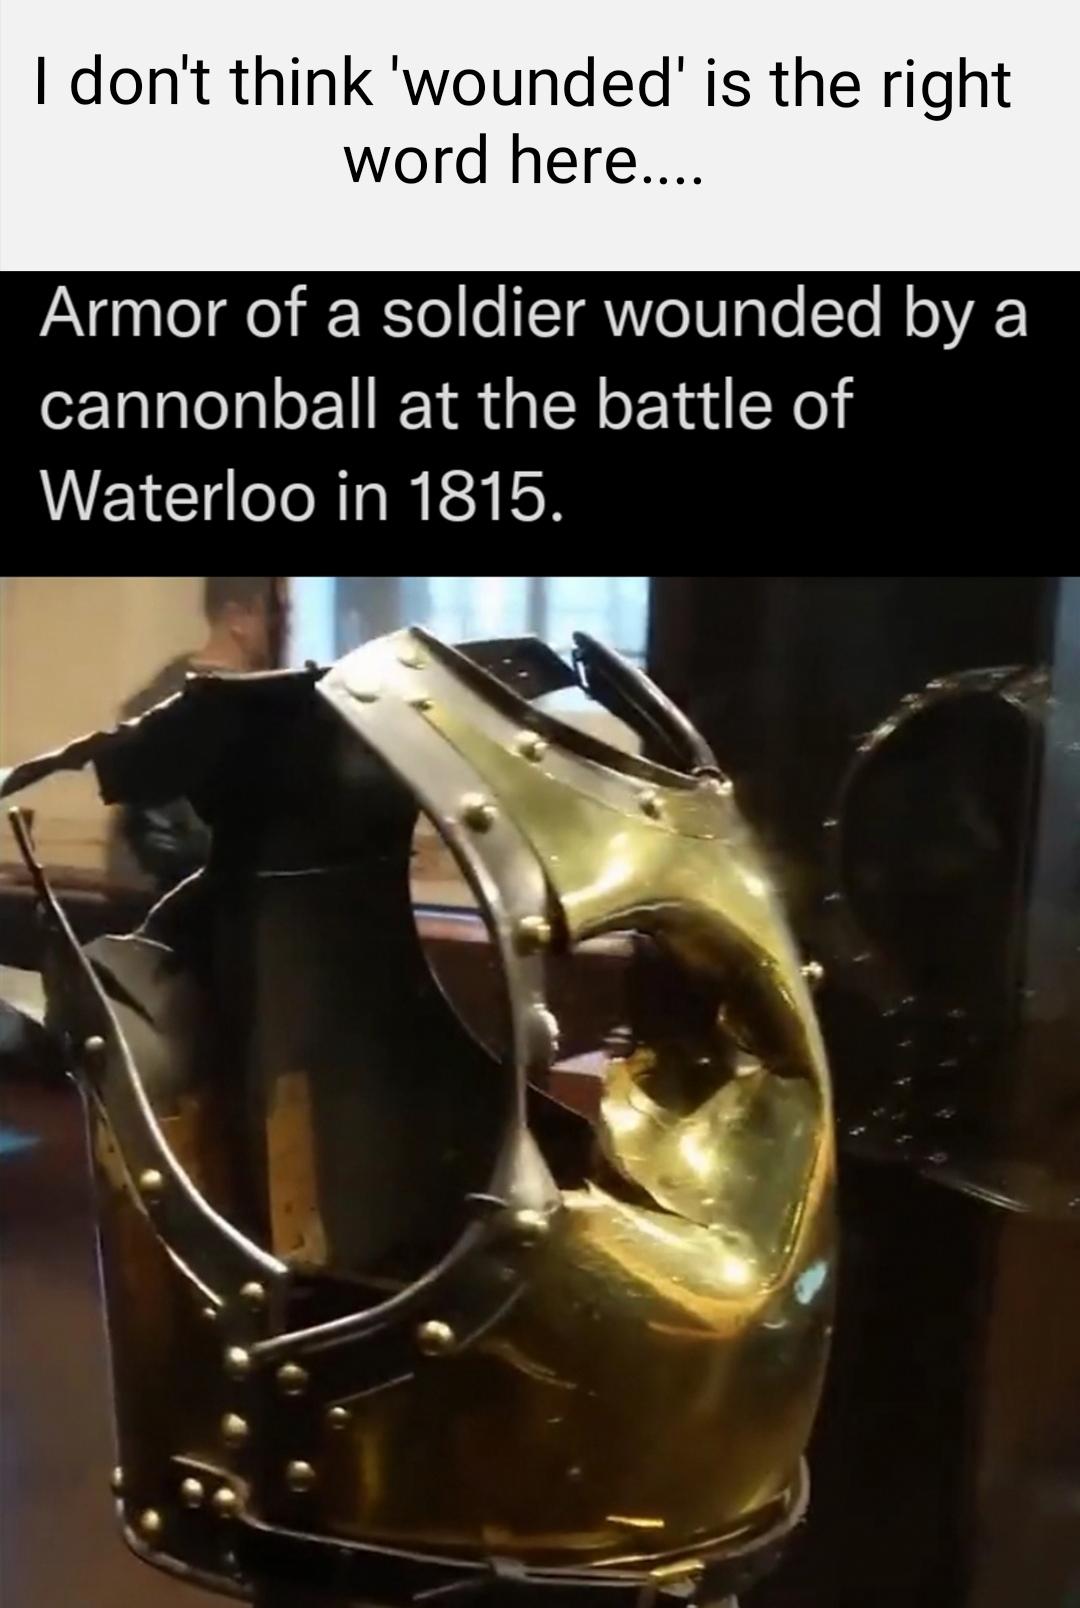 dank memes - funny memes - metal - I don't think 'wounded' is the right word here.... Armor of a soldier wounded by a cannonball at the battle of Waterloo in 1815.